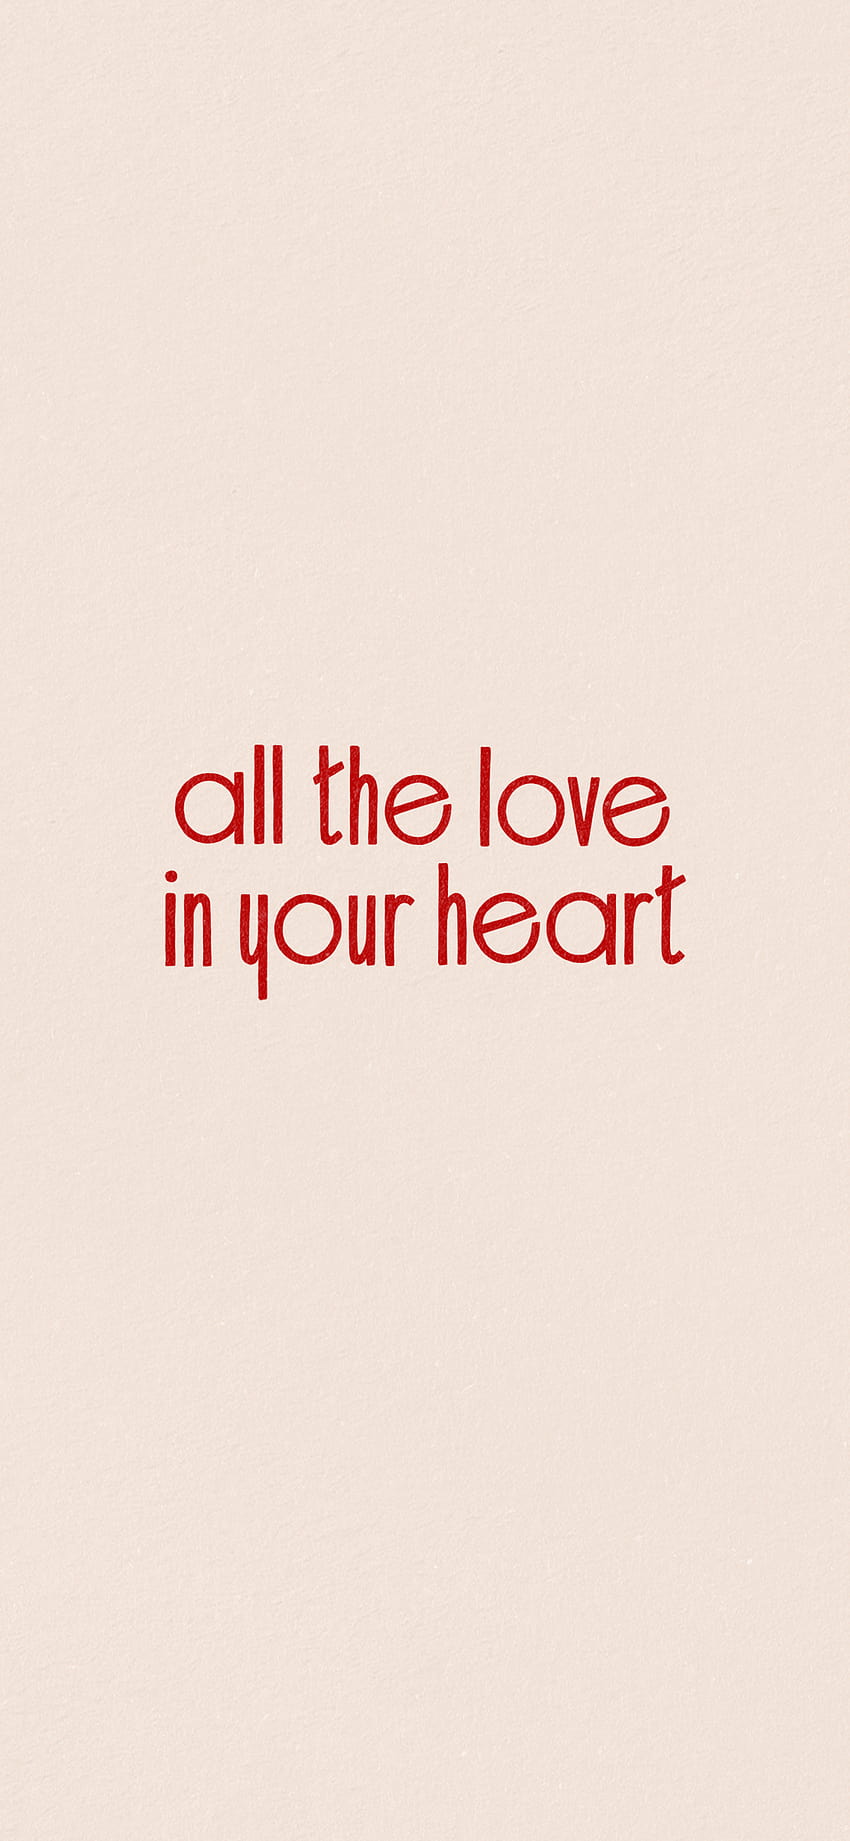 All the love in your heart, love lyrics HD phone wallpaper | Pxfuel